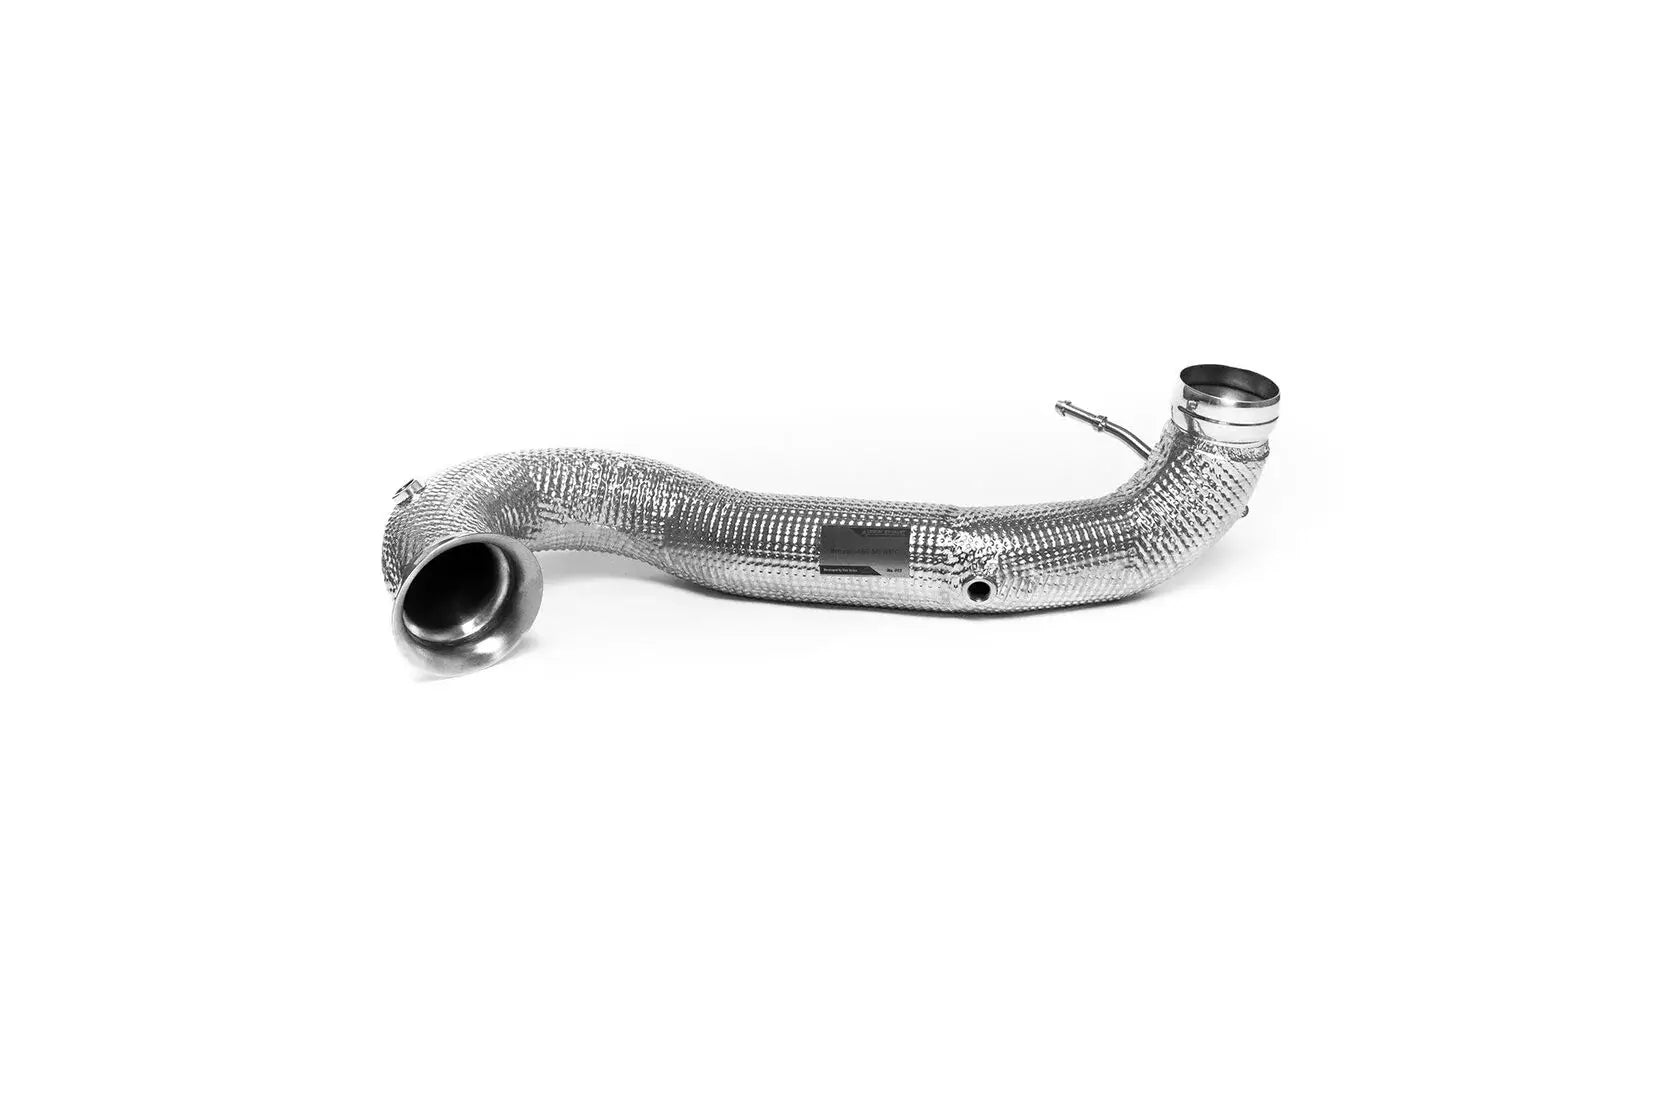 DEIKIN 10-MB.A45.W176-DP Downpipe for Mercedes-AMG A45 (w176) without HeatShield Photo-1 